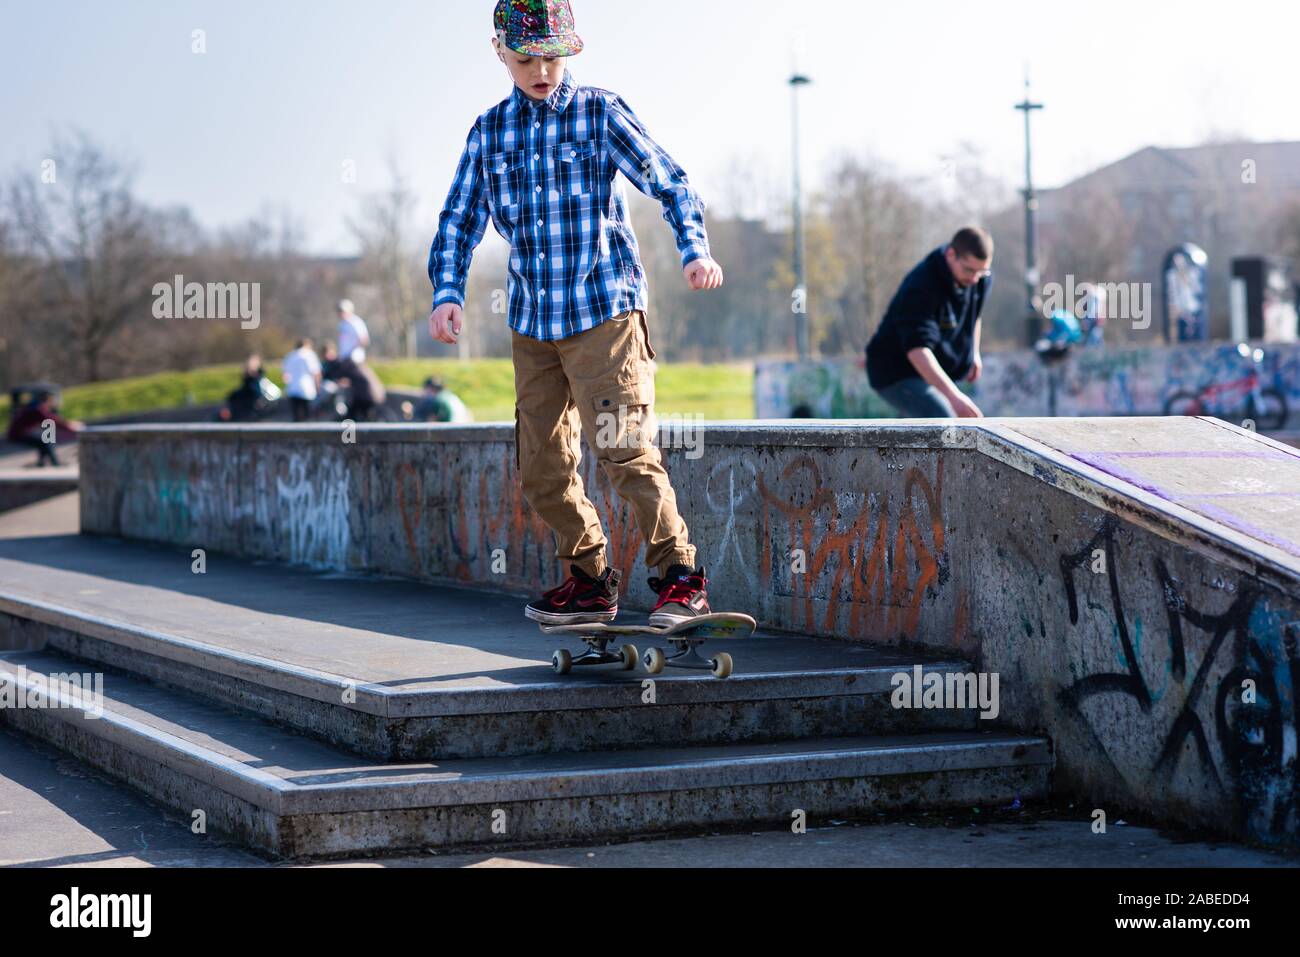 A cute little boy with ADHD, Autism, Asperger syndrome burns off energy at the Skateboard park, practicing tricks such as the ollie and jumping steps Stock Photo